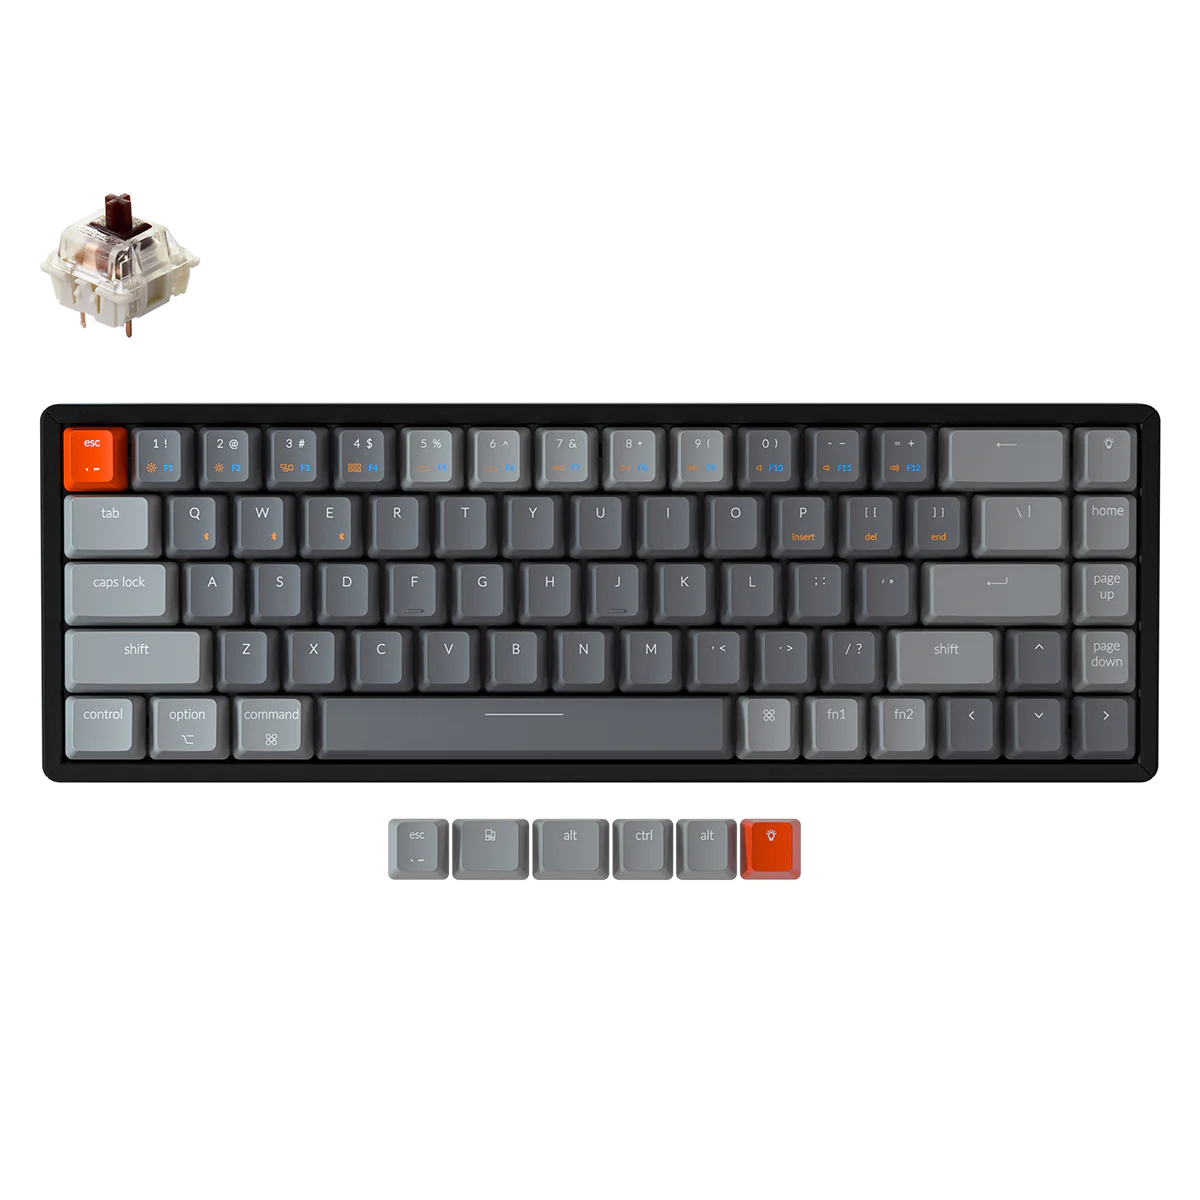 Keychron K6 68 Keys Bluetooth Wireless / Wired Compact Mechanical Keyboard with RGB Backlight, Aluminum Frame and Hot-Swappable Switches for Mac and Windows PC Computer (Red Linear, Brown Tactile) K6W1 K6W3